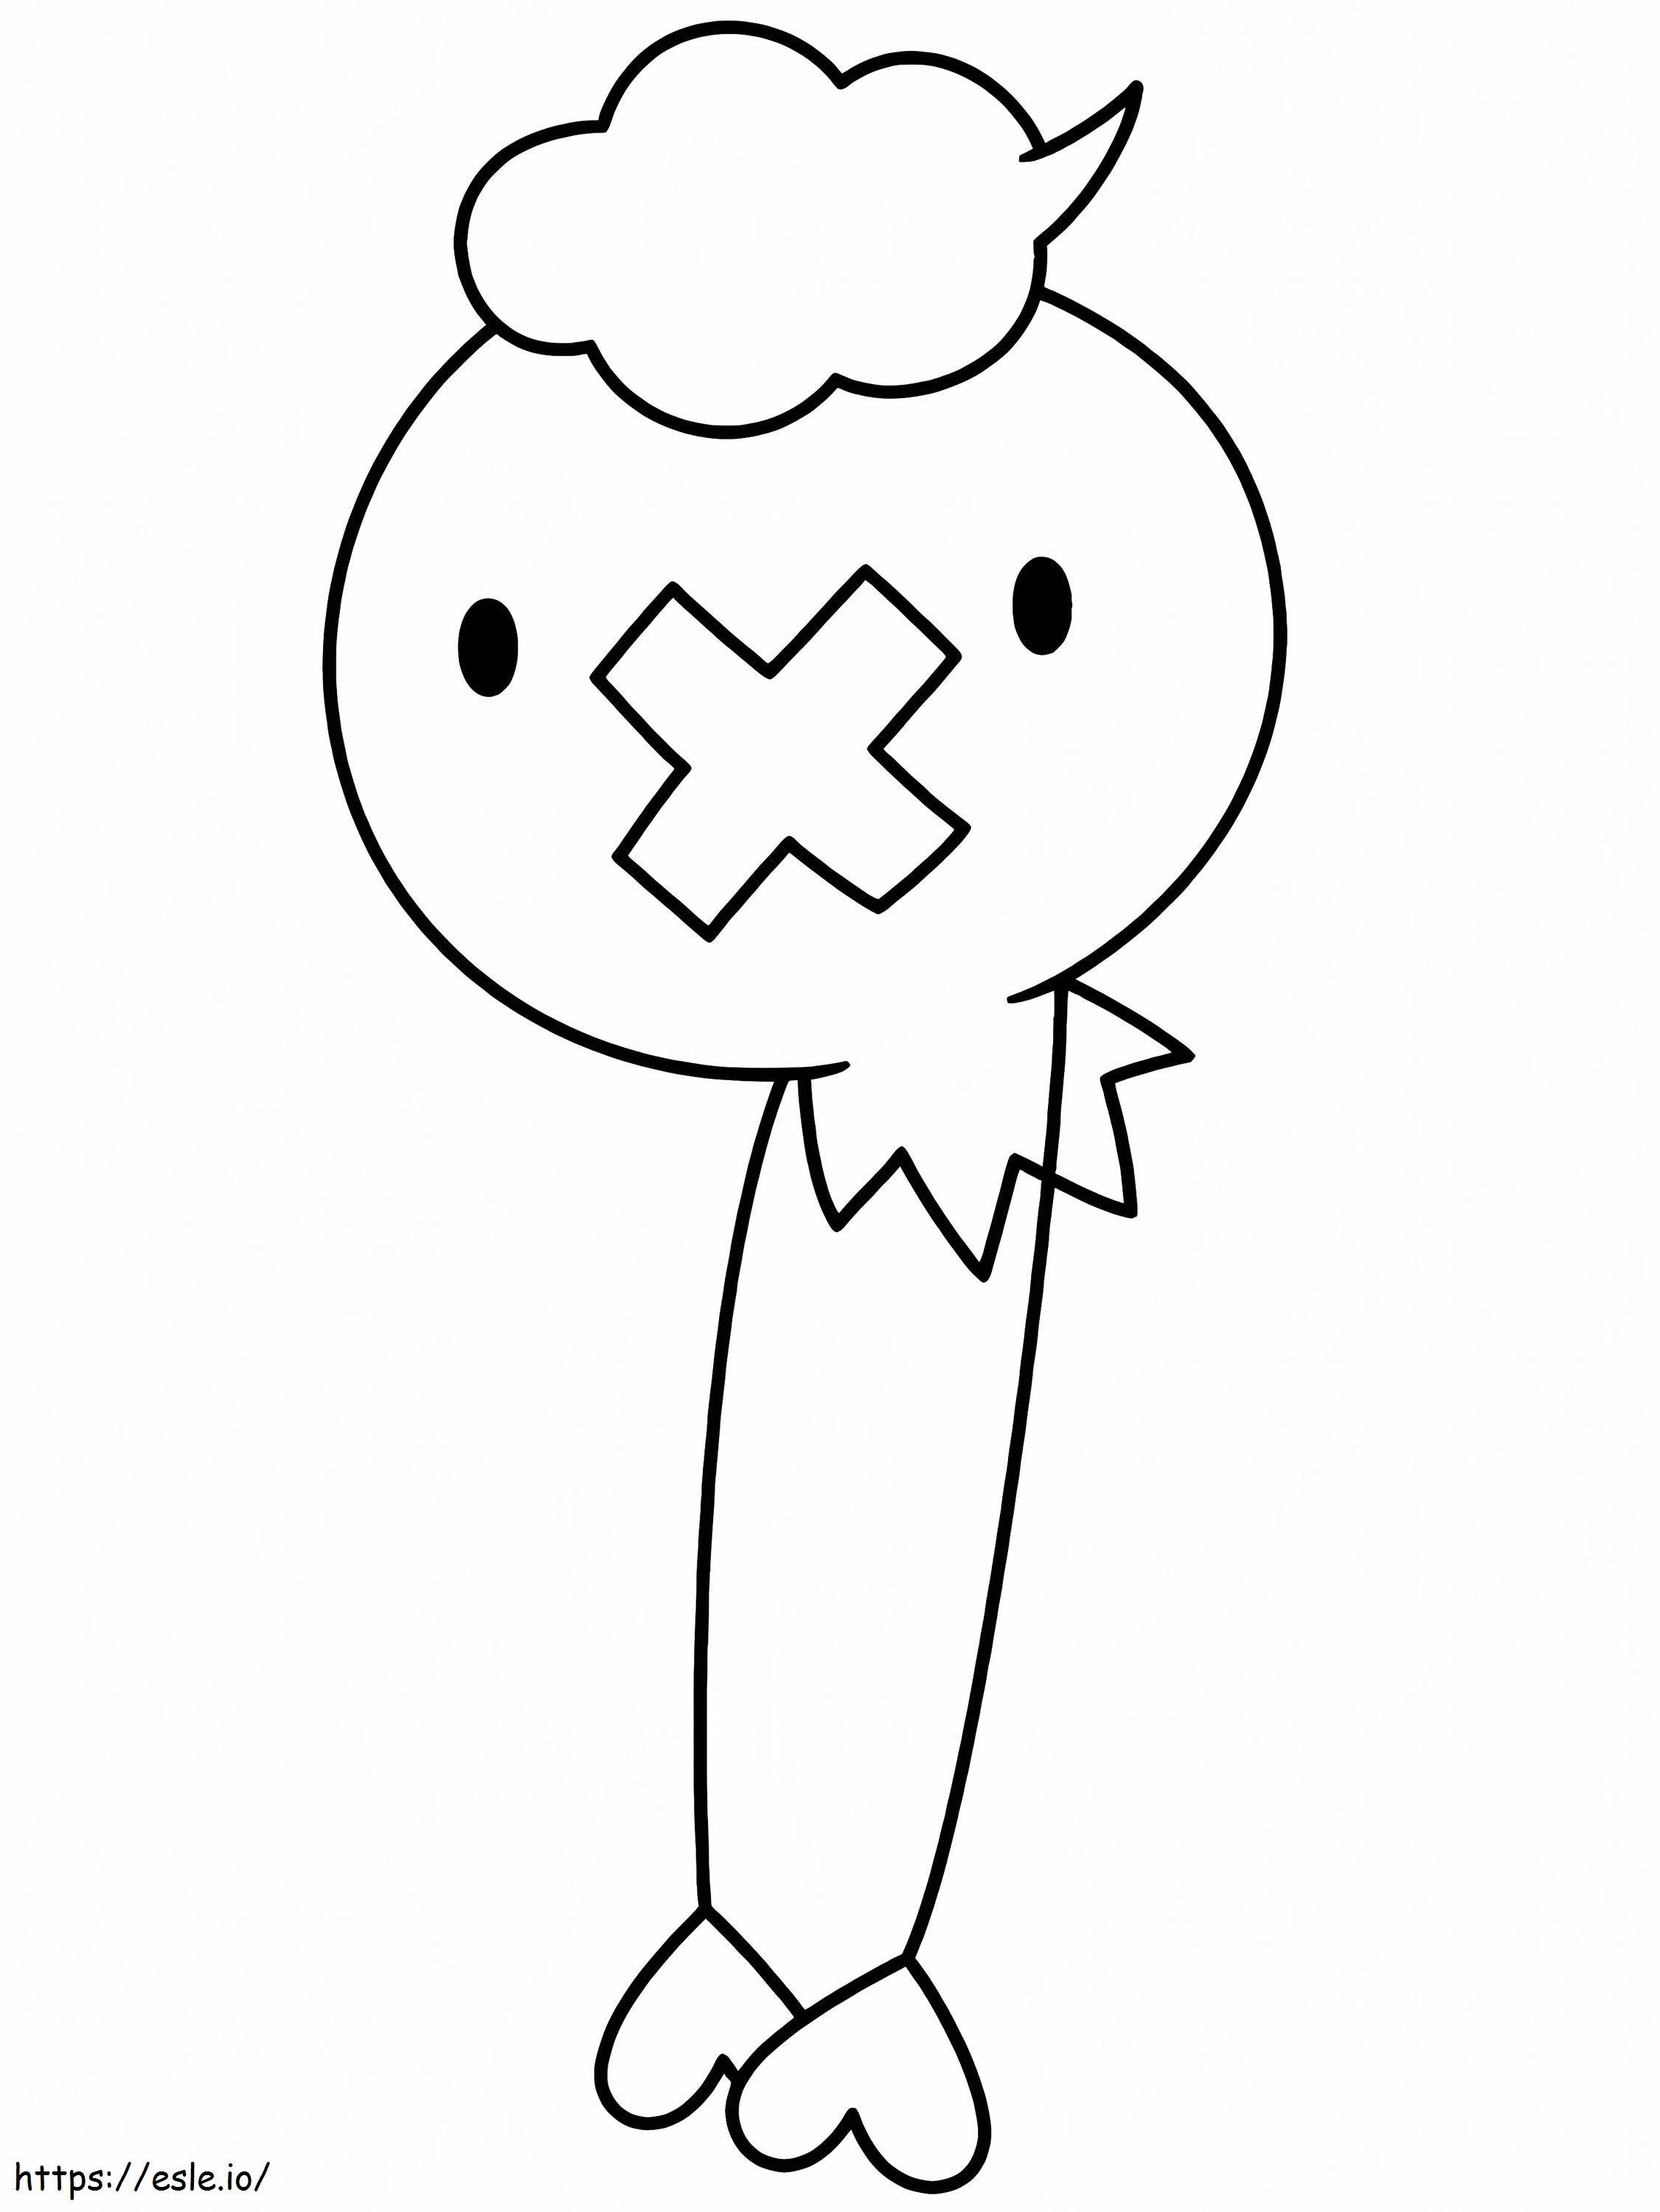 Adorable Drifloon coloring page